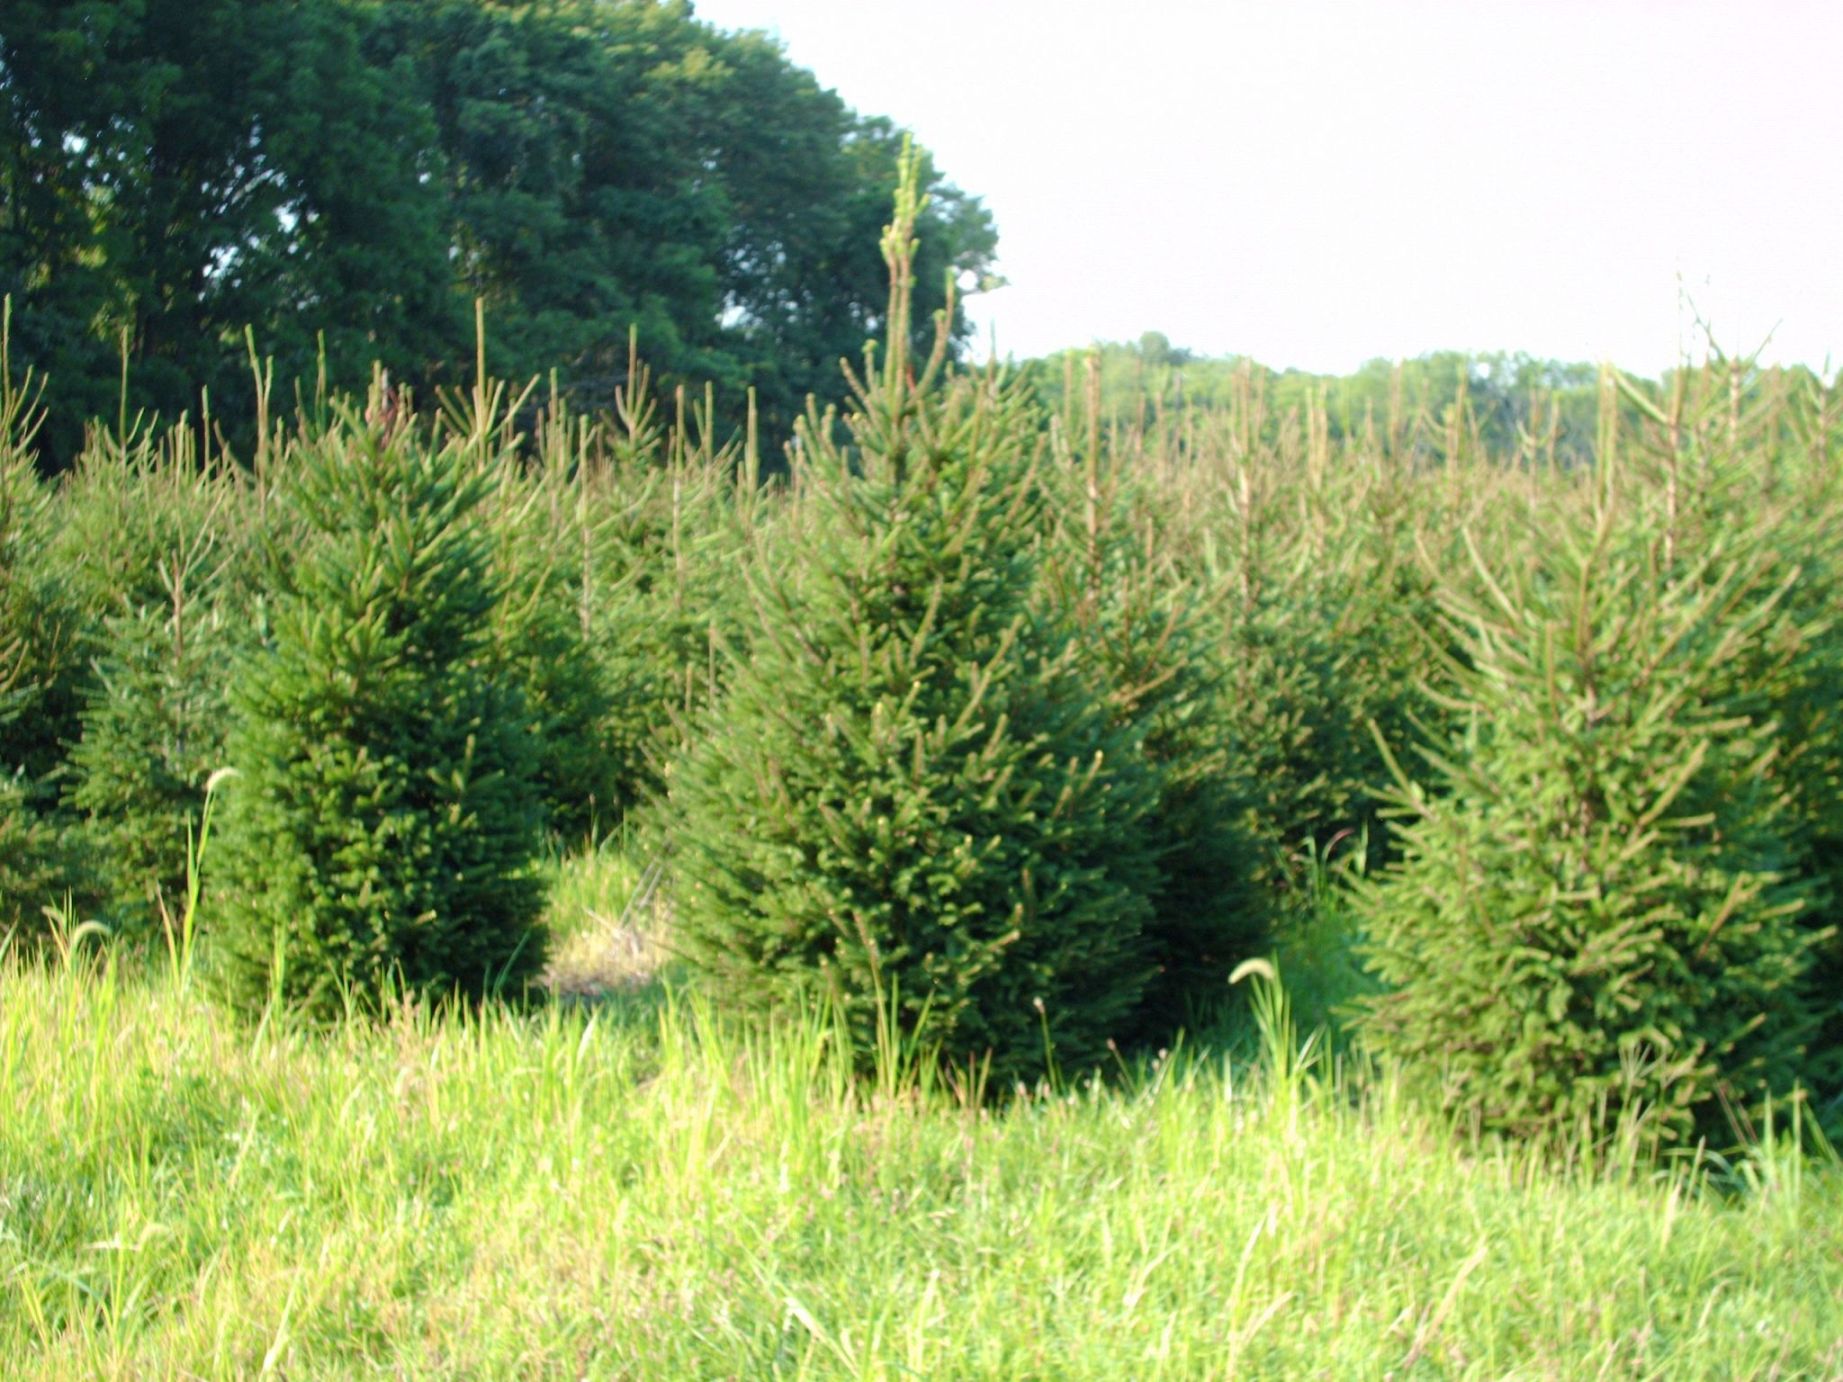 Norway Spruces In Bucks County
</a>  





<a href=